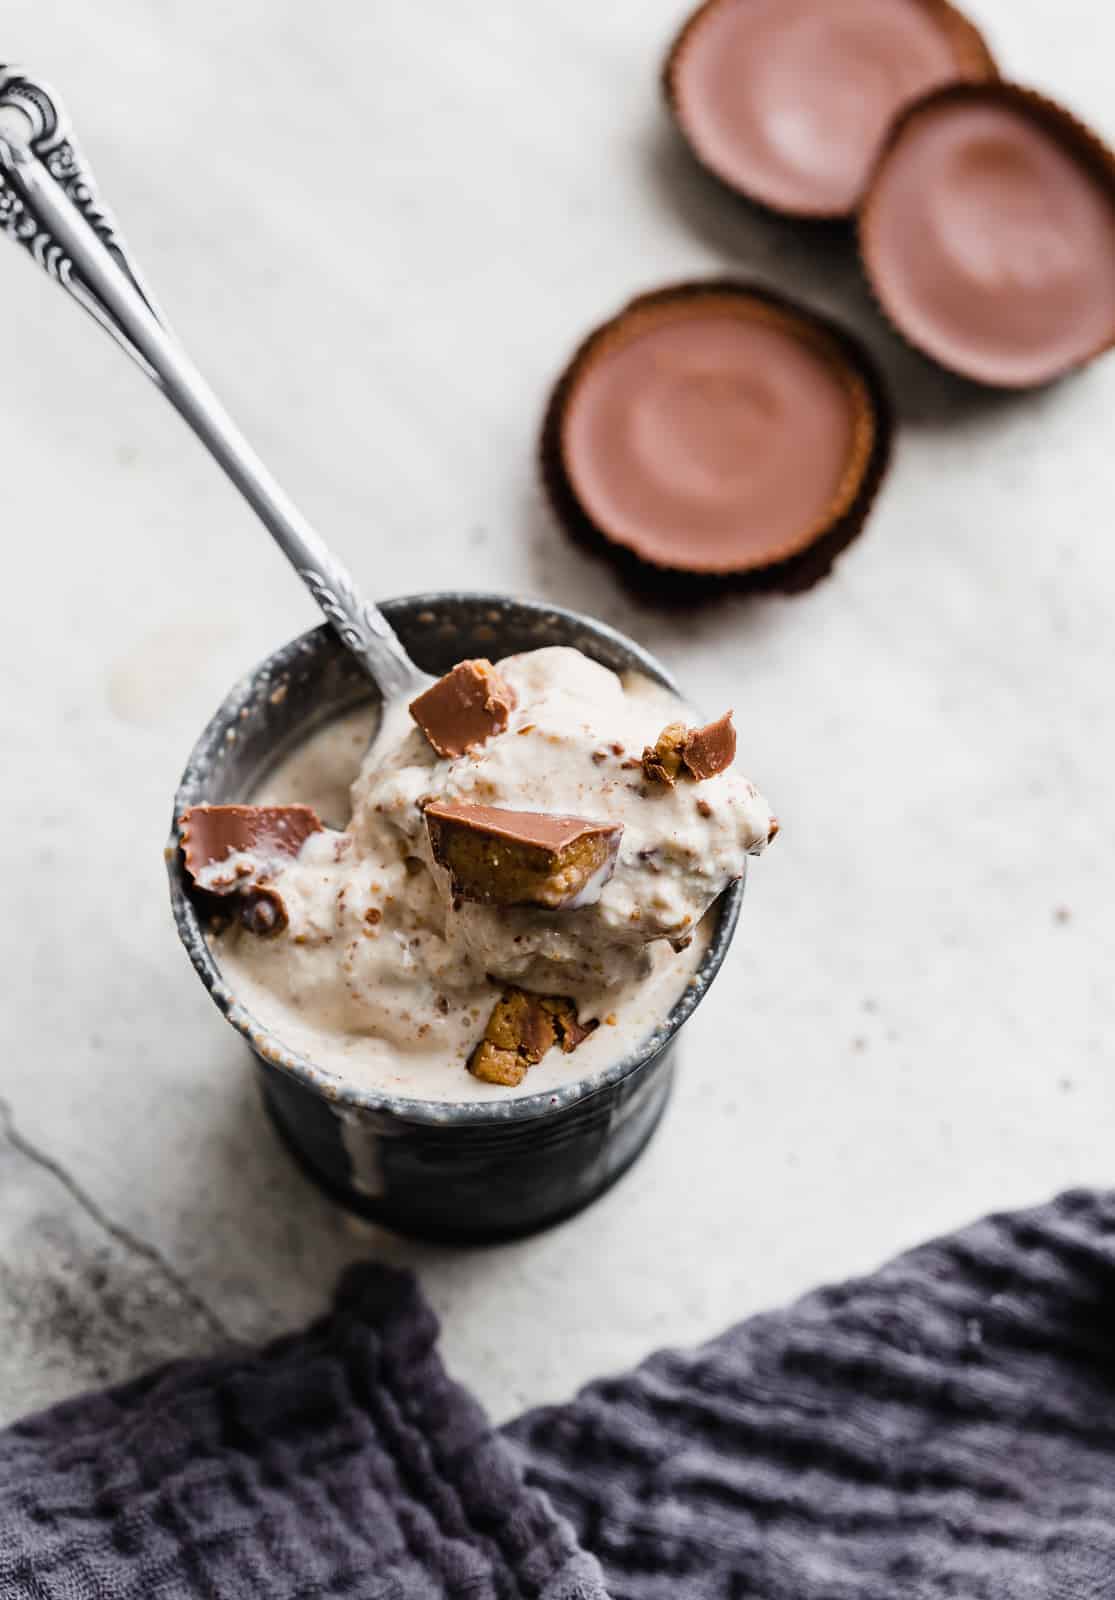 A spoon scooping out some homemade Reese's peanut butter cup blizzard.